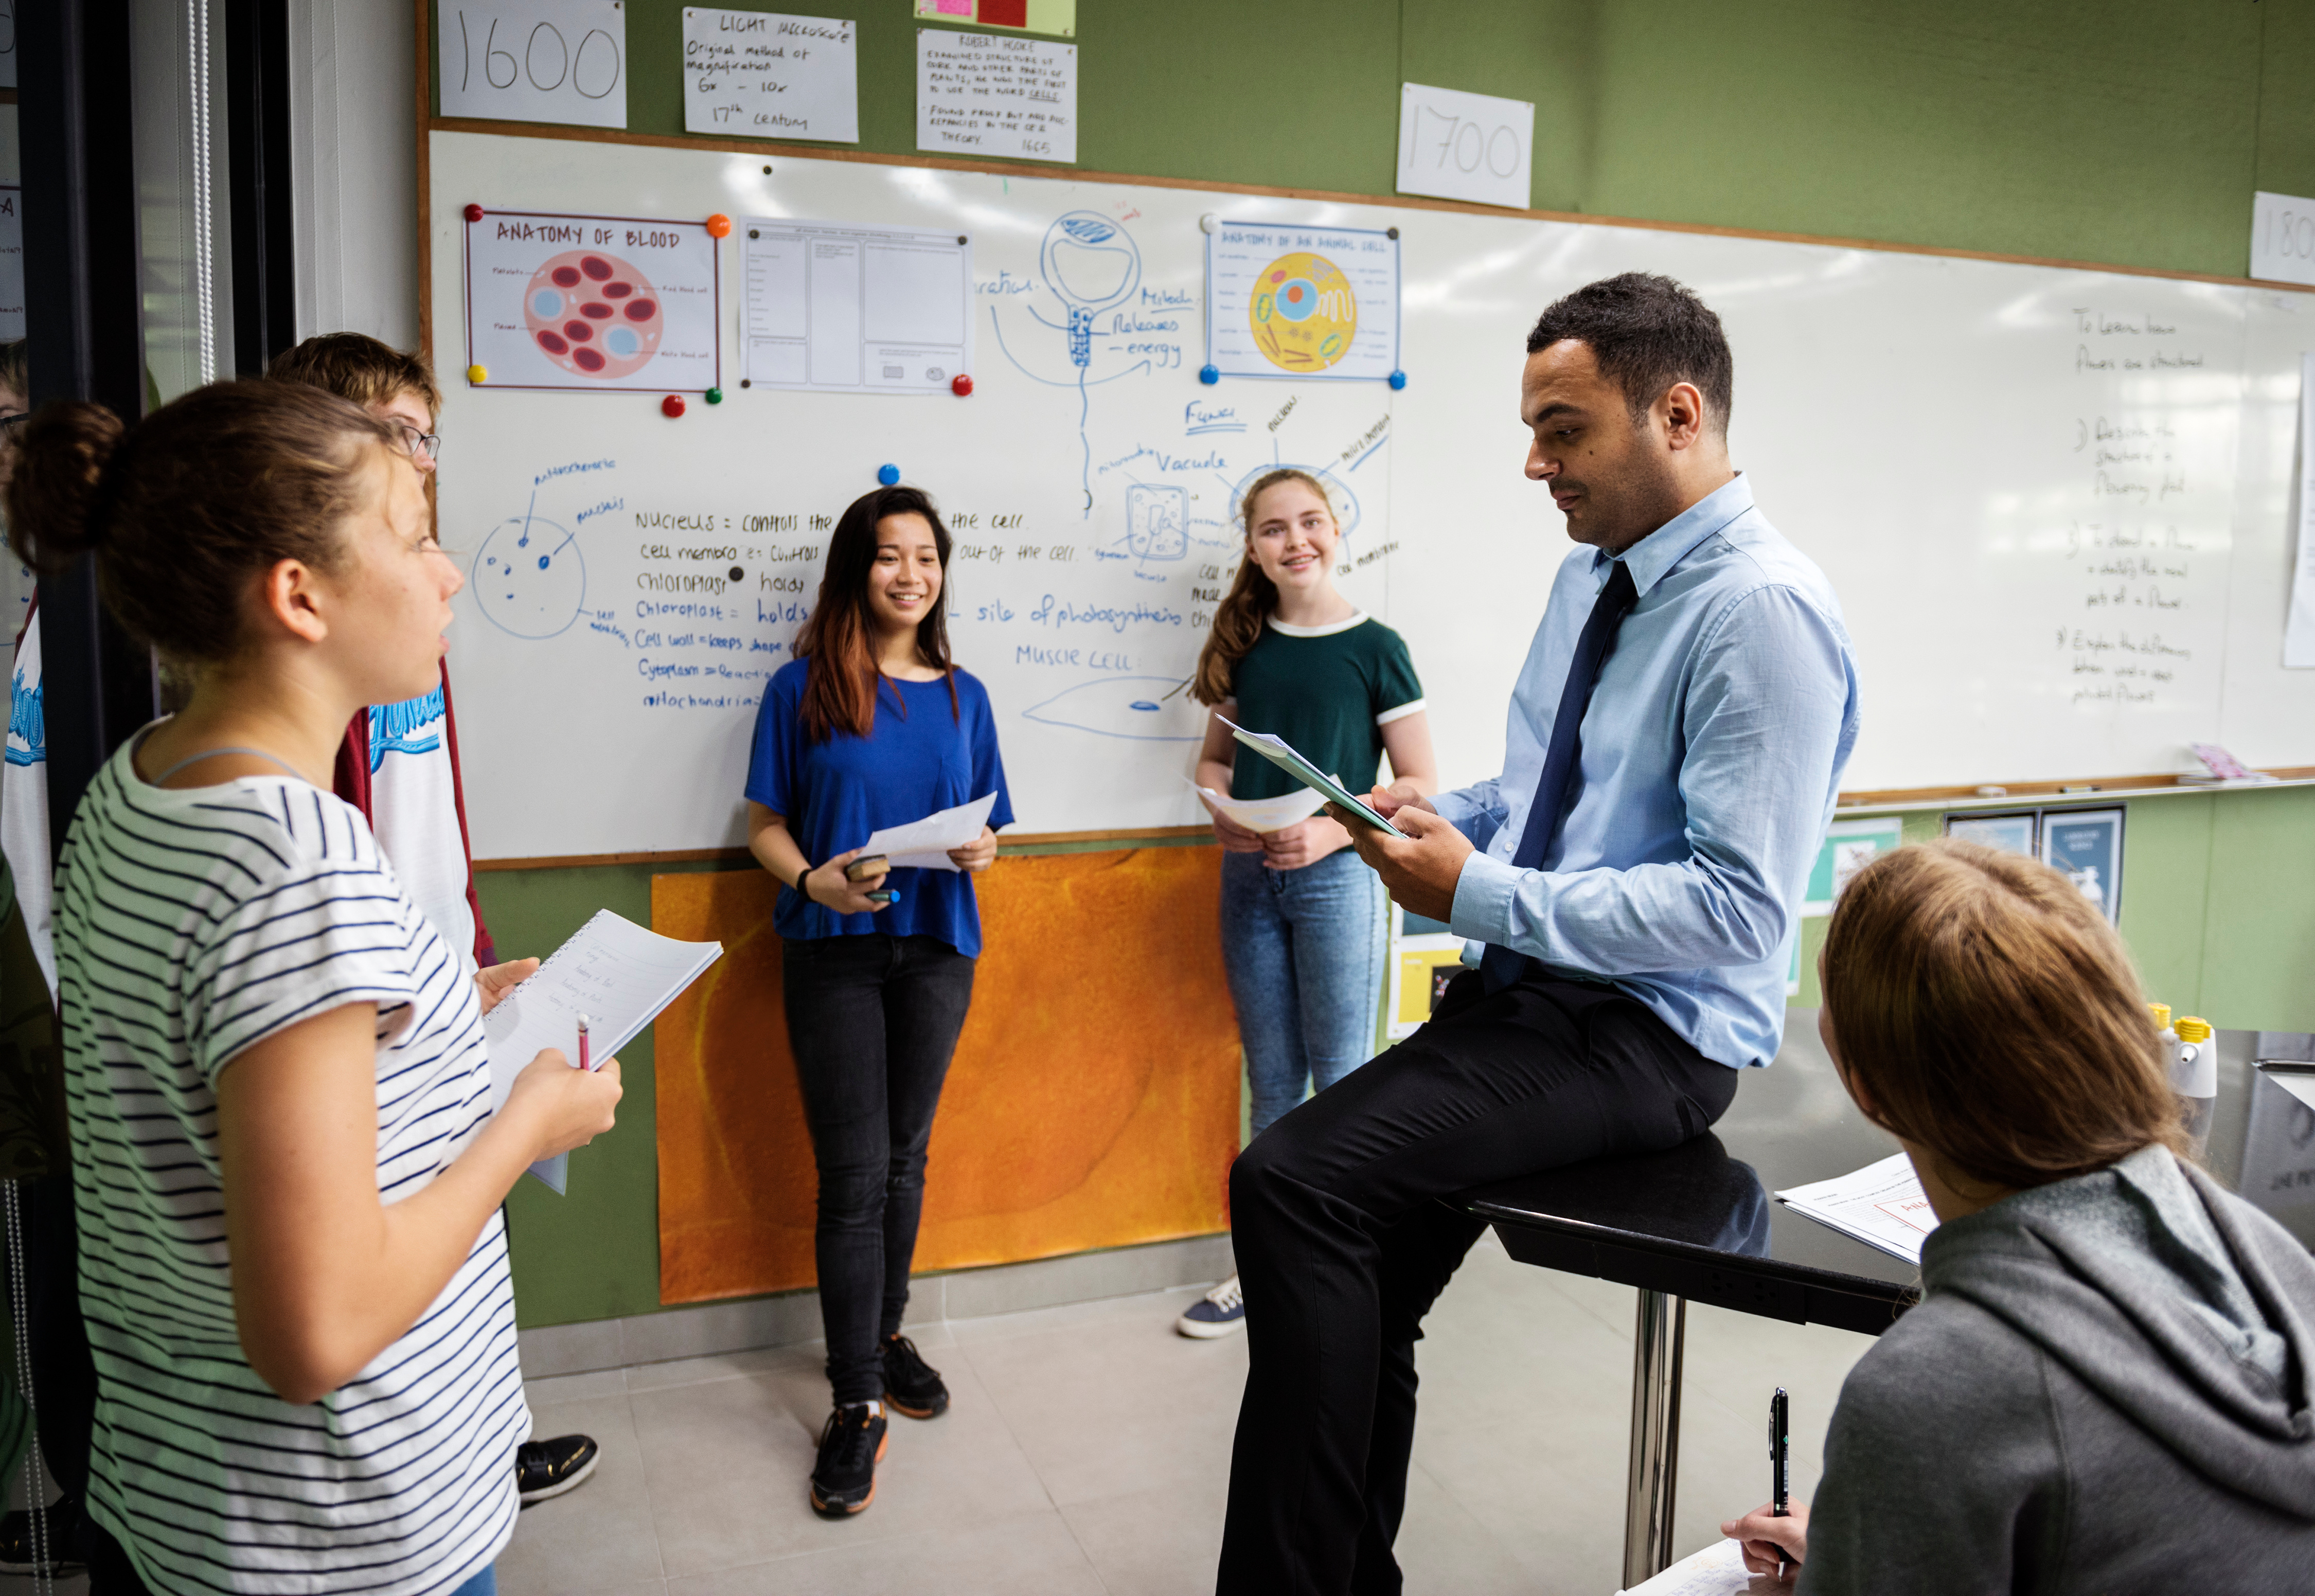 Teacher shortages are most severe in special and bilingual education, high school STEM and other specialized subjects. (AdobeStock)